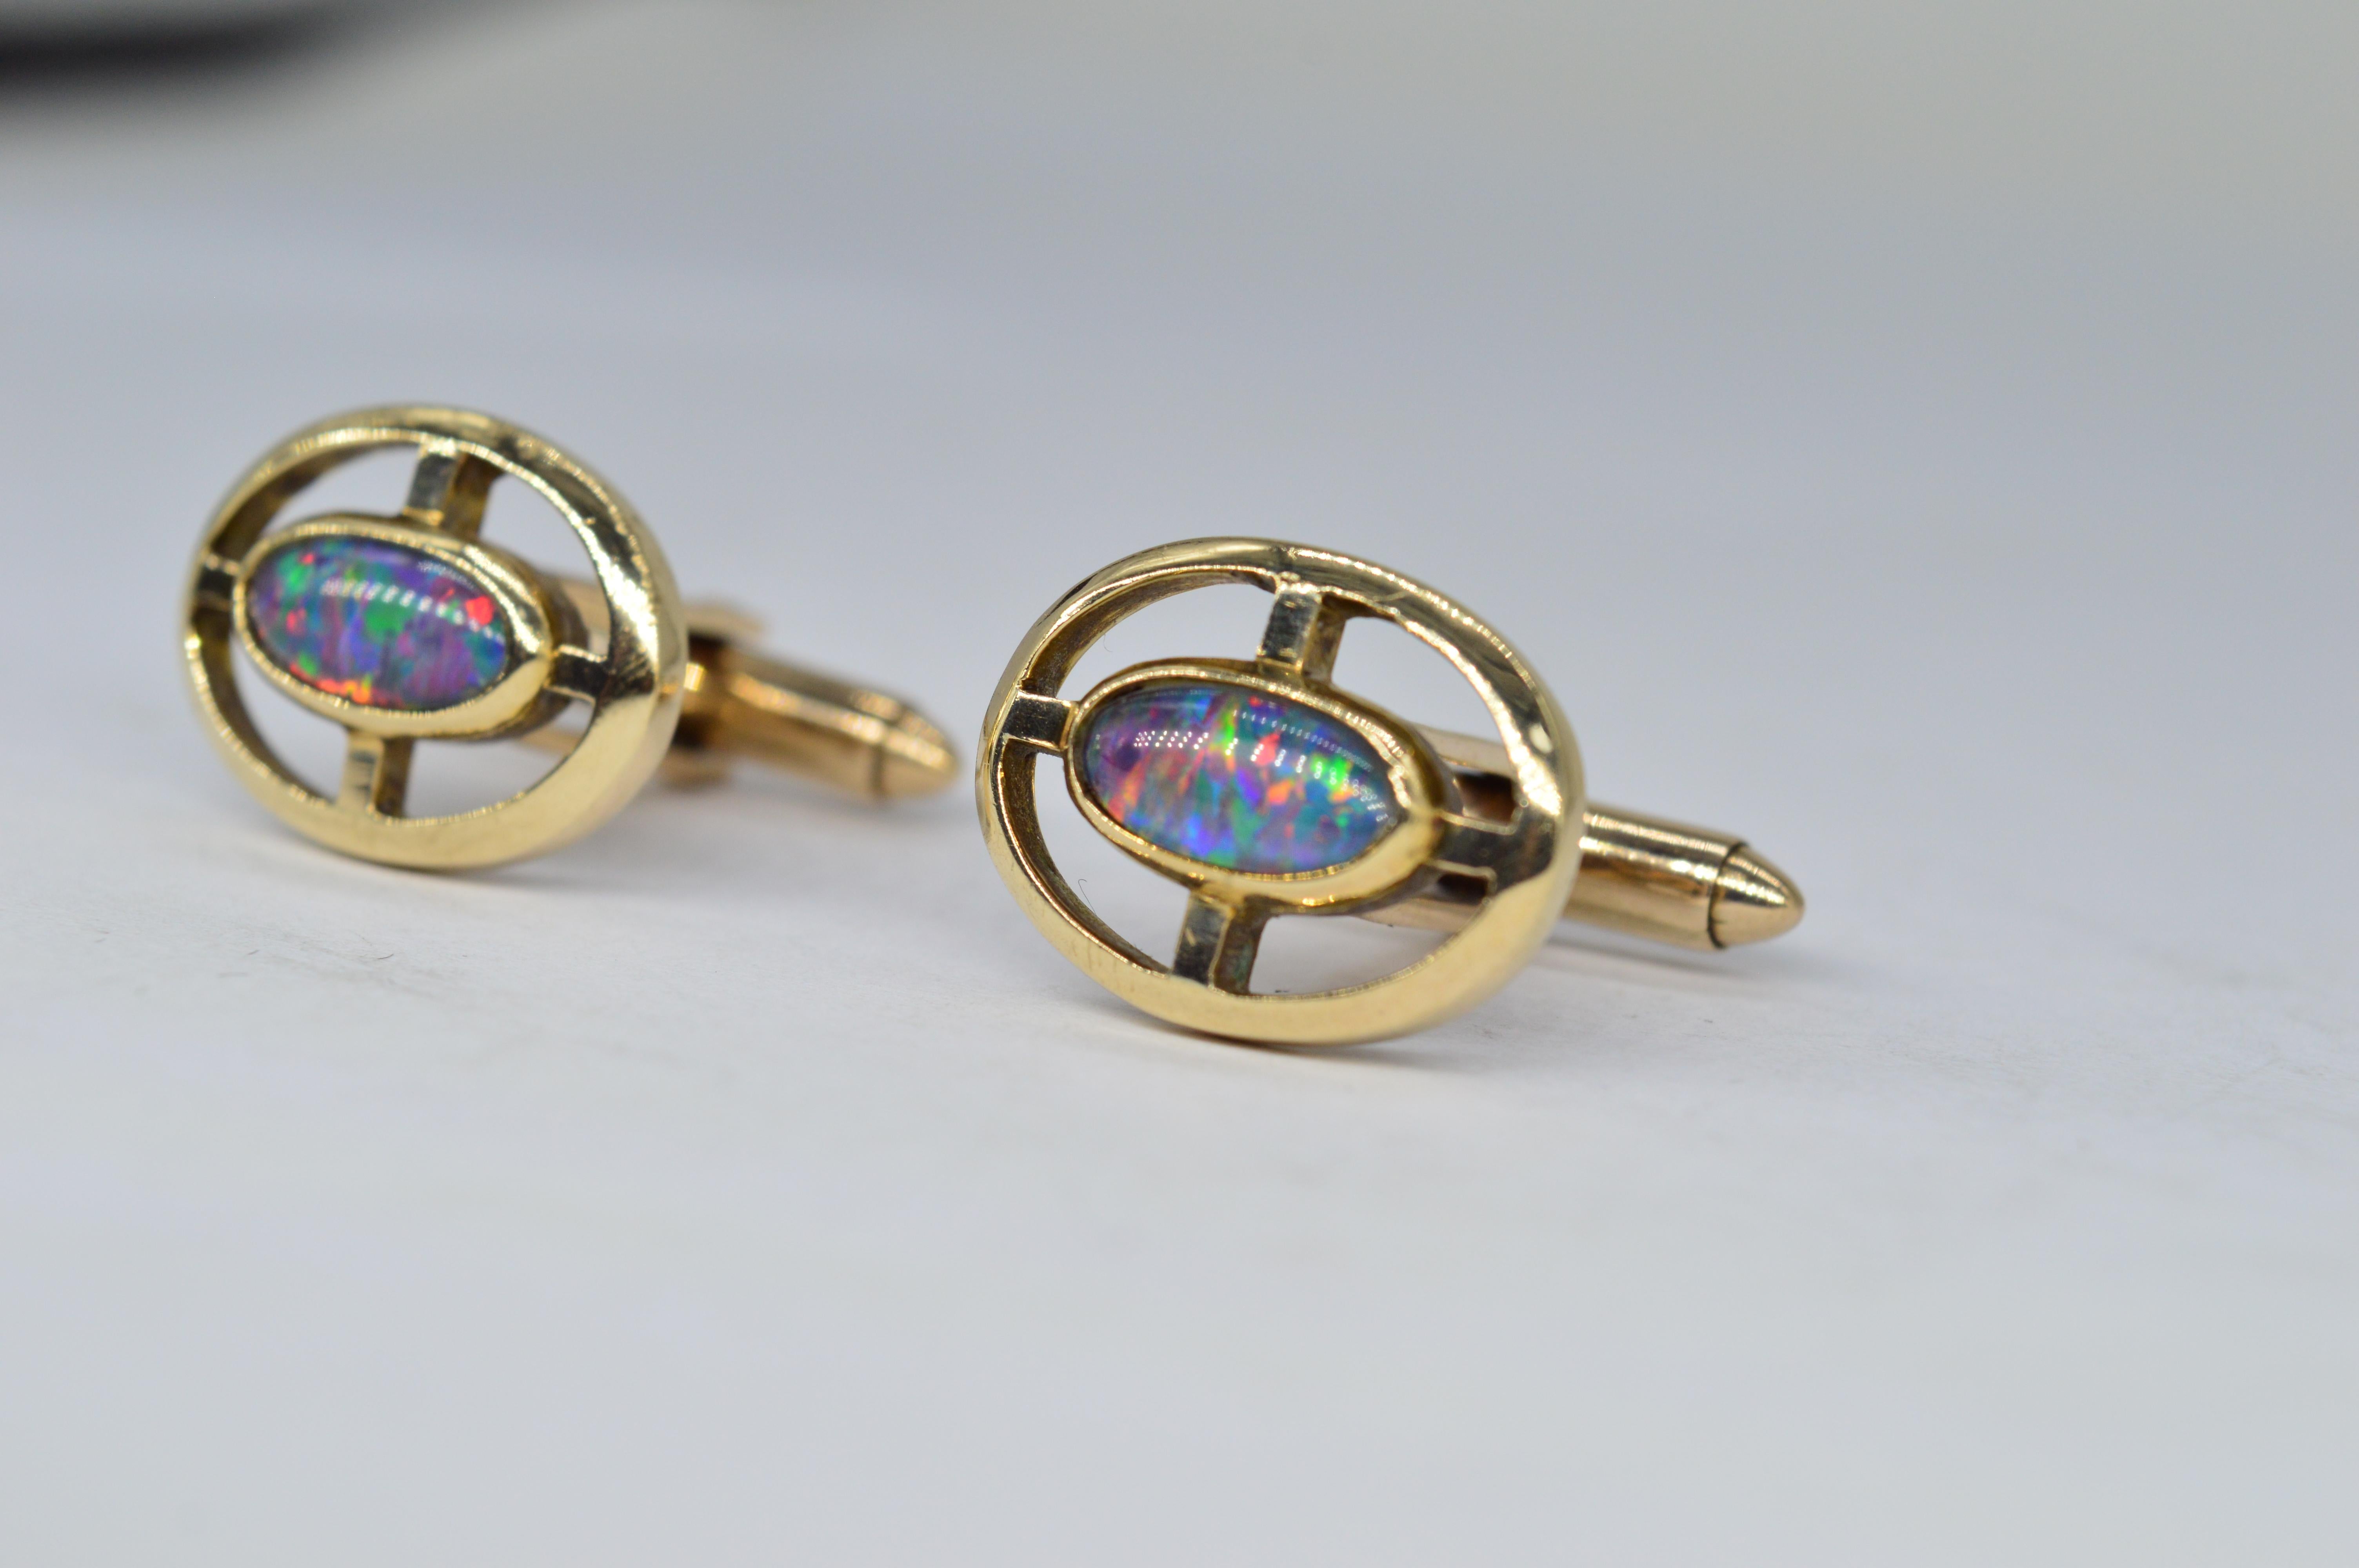 A set of hand crafted 9ct gold Opal triplet cufflinks

The opal triplets feature a bright variety of colours

10.04g

We have sold to the set of Hit shows like Peaky Blinders and Outlander as well as to Buckingham Palace so our items are truly fit